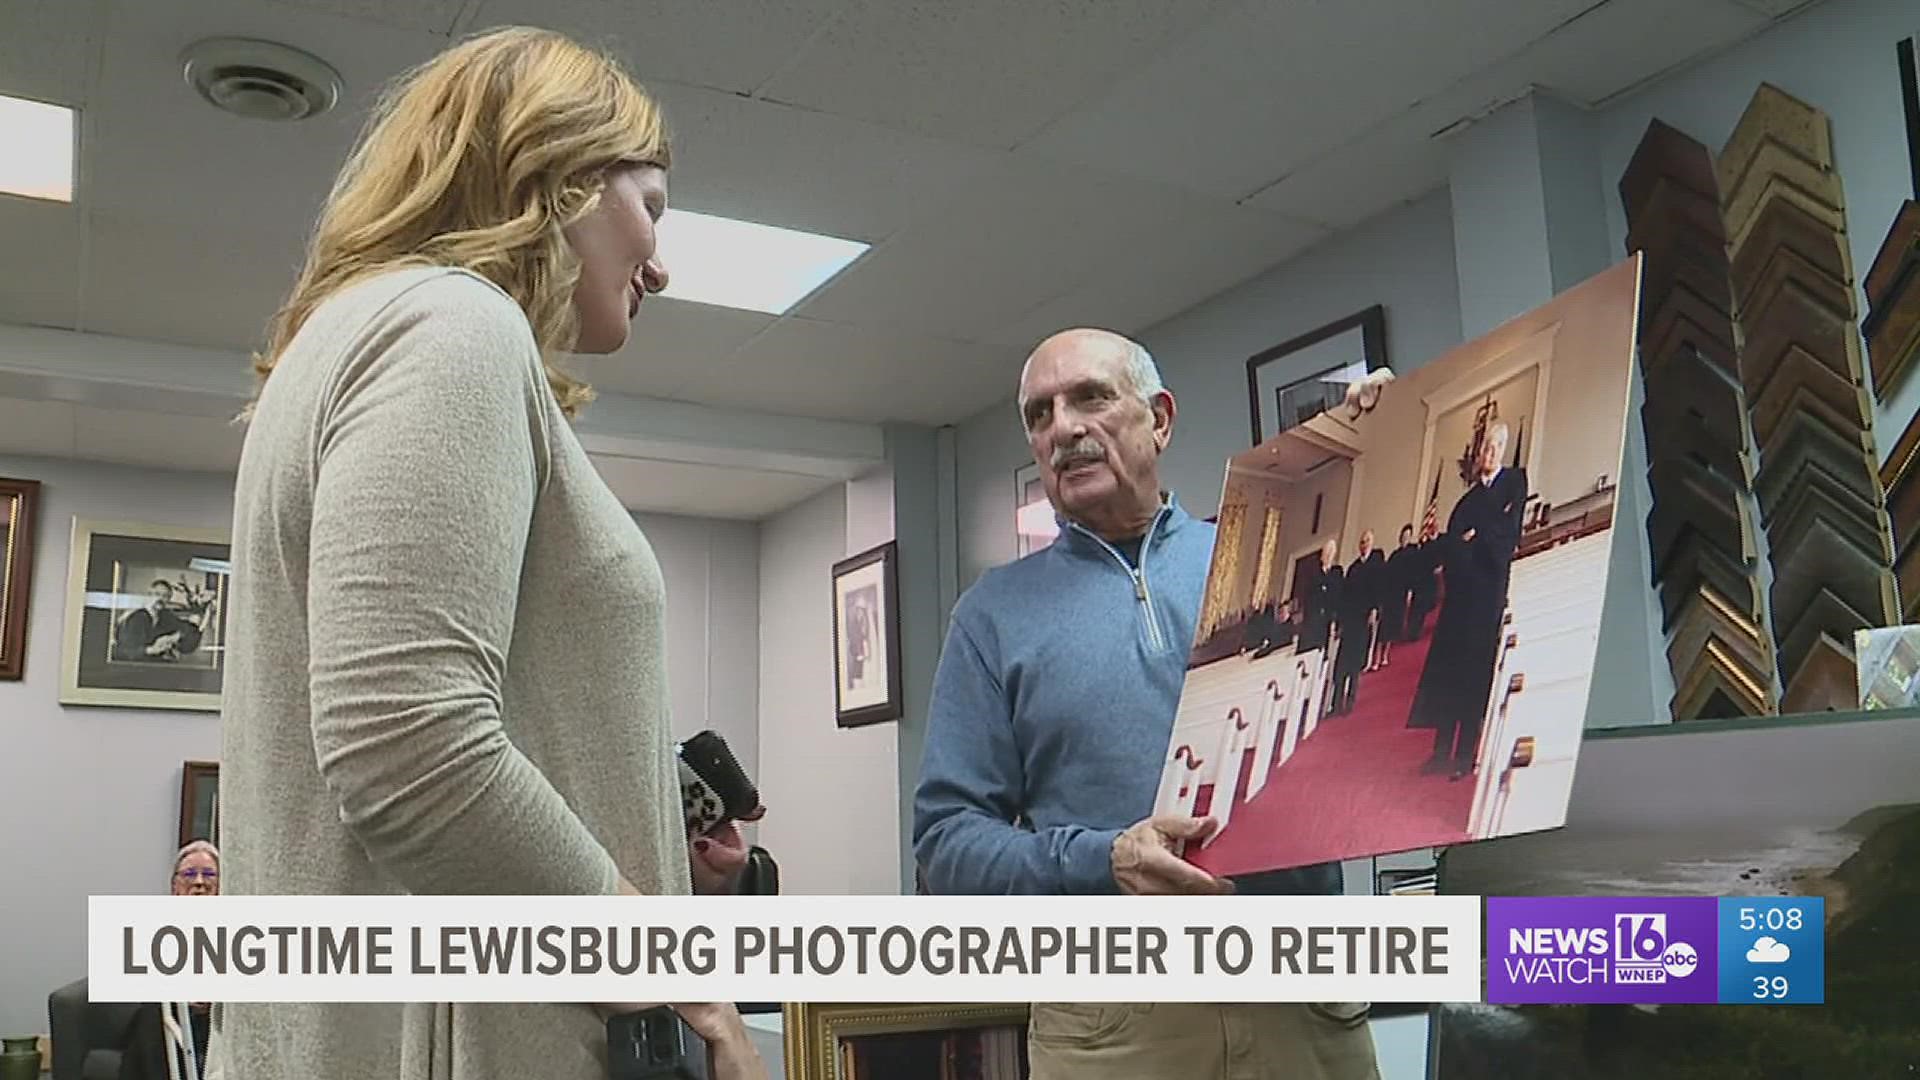 John Gardner has been a photographer and owner of the Lewisburg Studio for more than 40 years, but he is soon retiring.